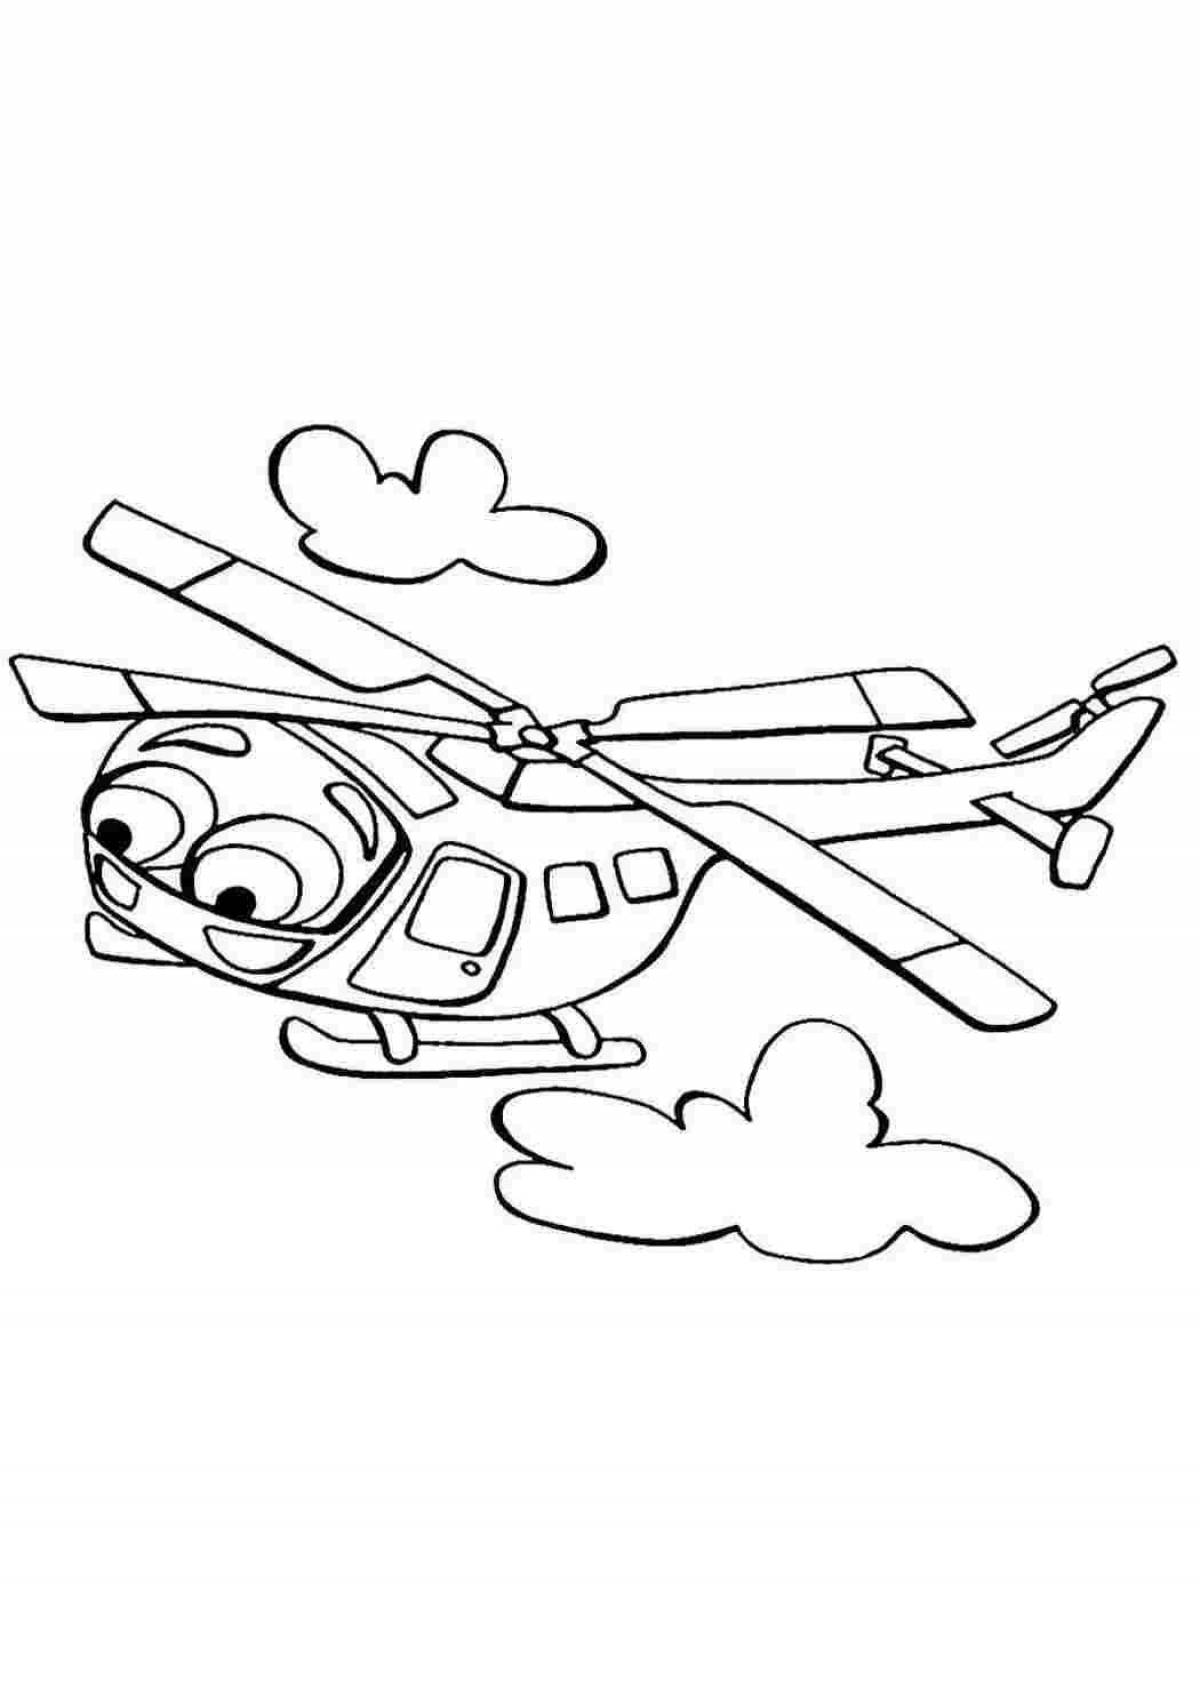 Impressive planes and helicopters coloring book